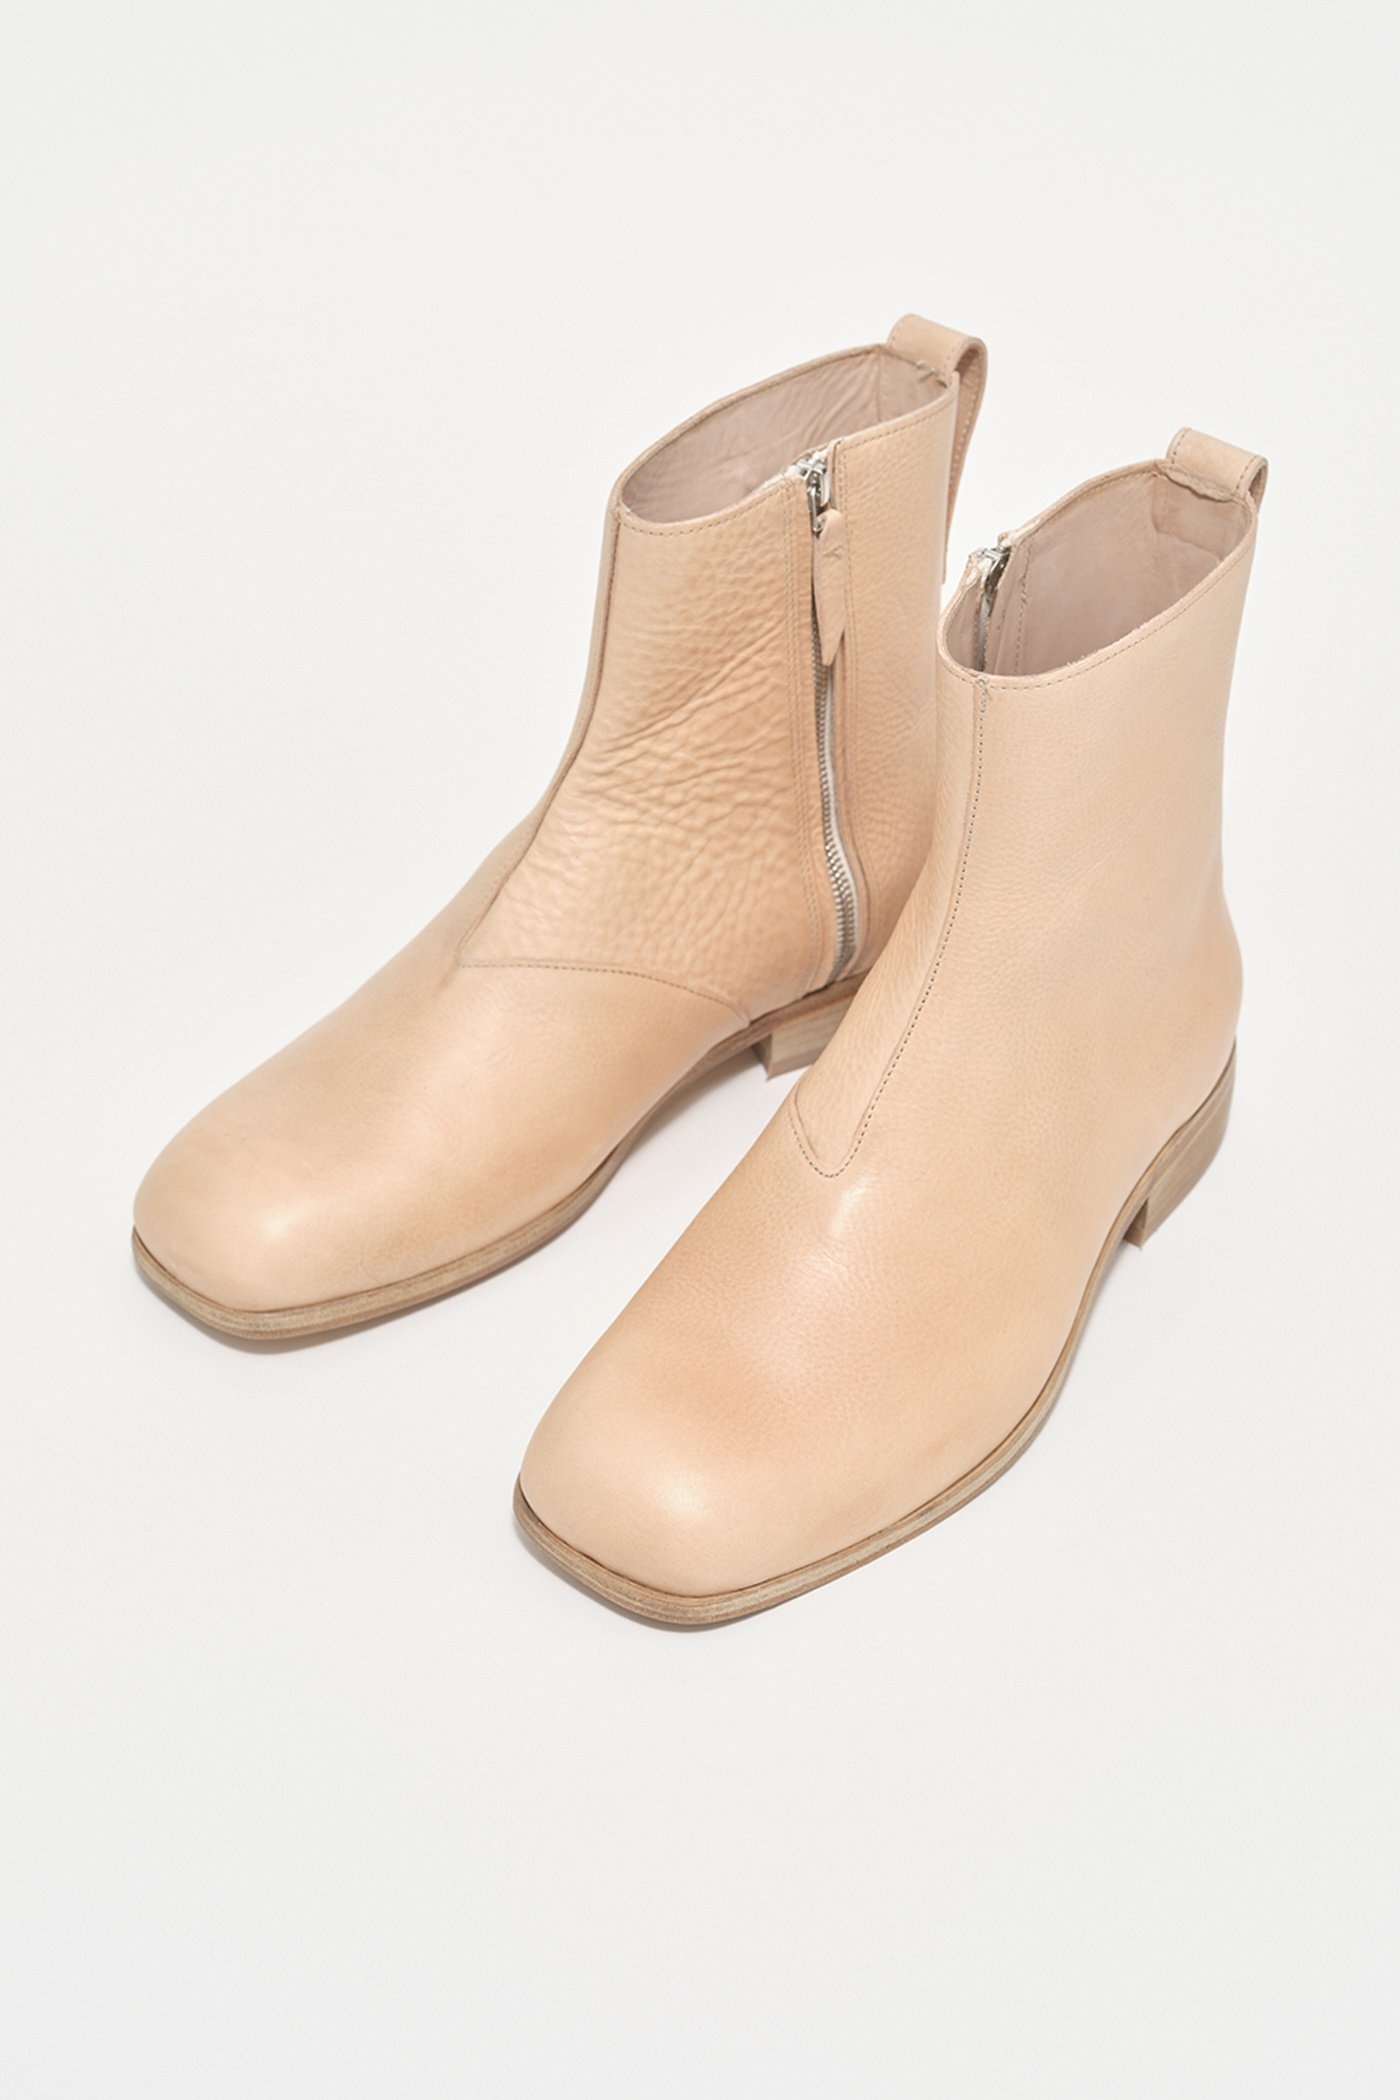 Michaelis Boot Waxy Natural Tan Leather - 6